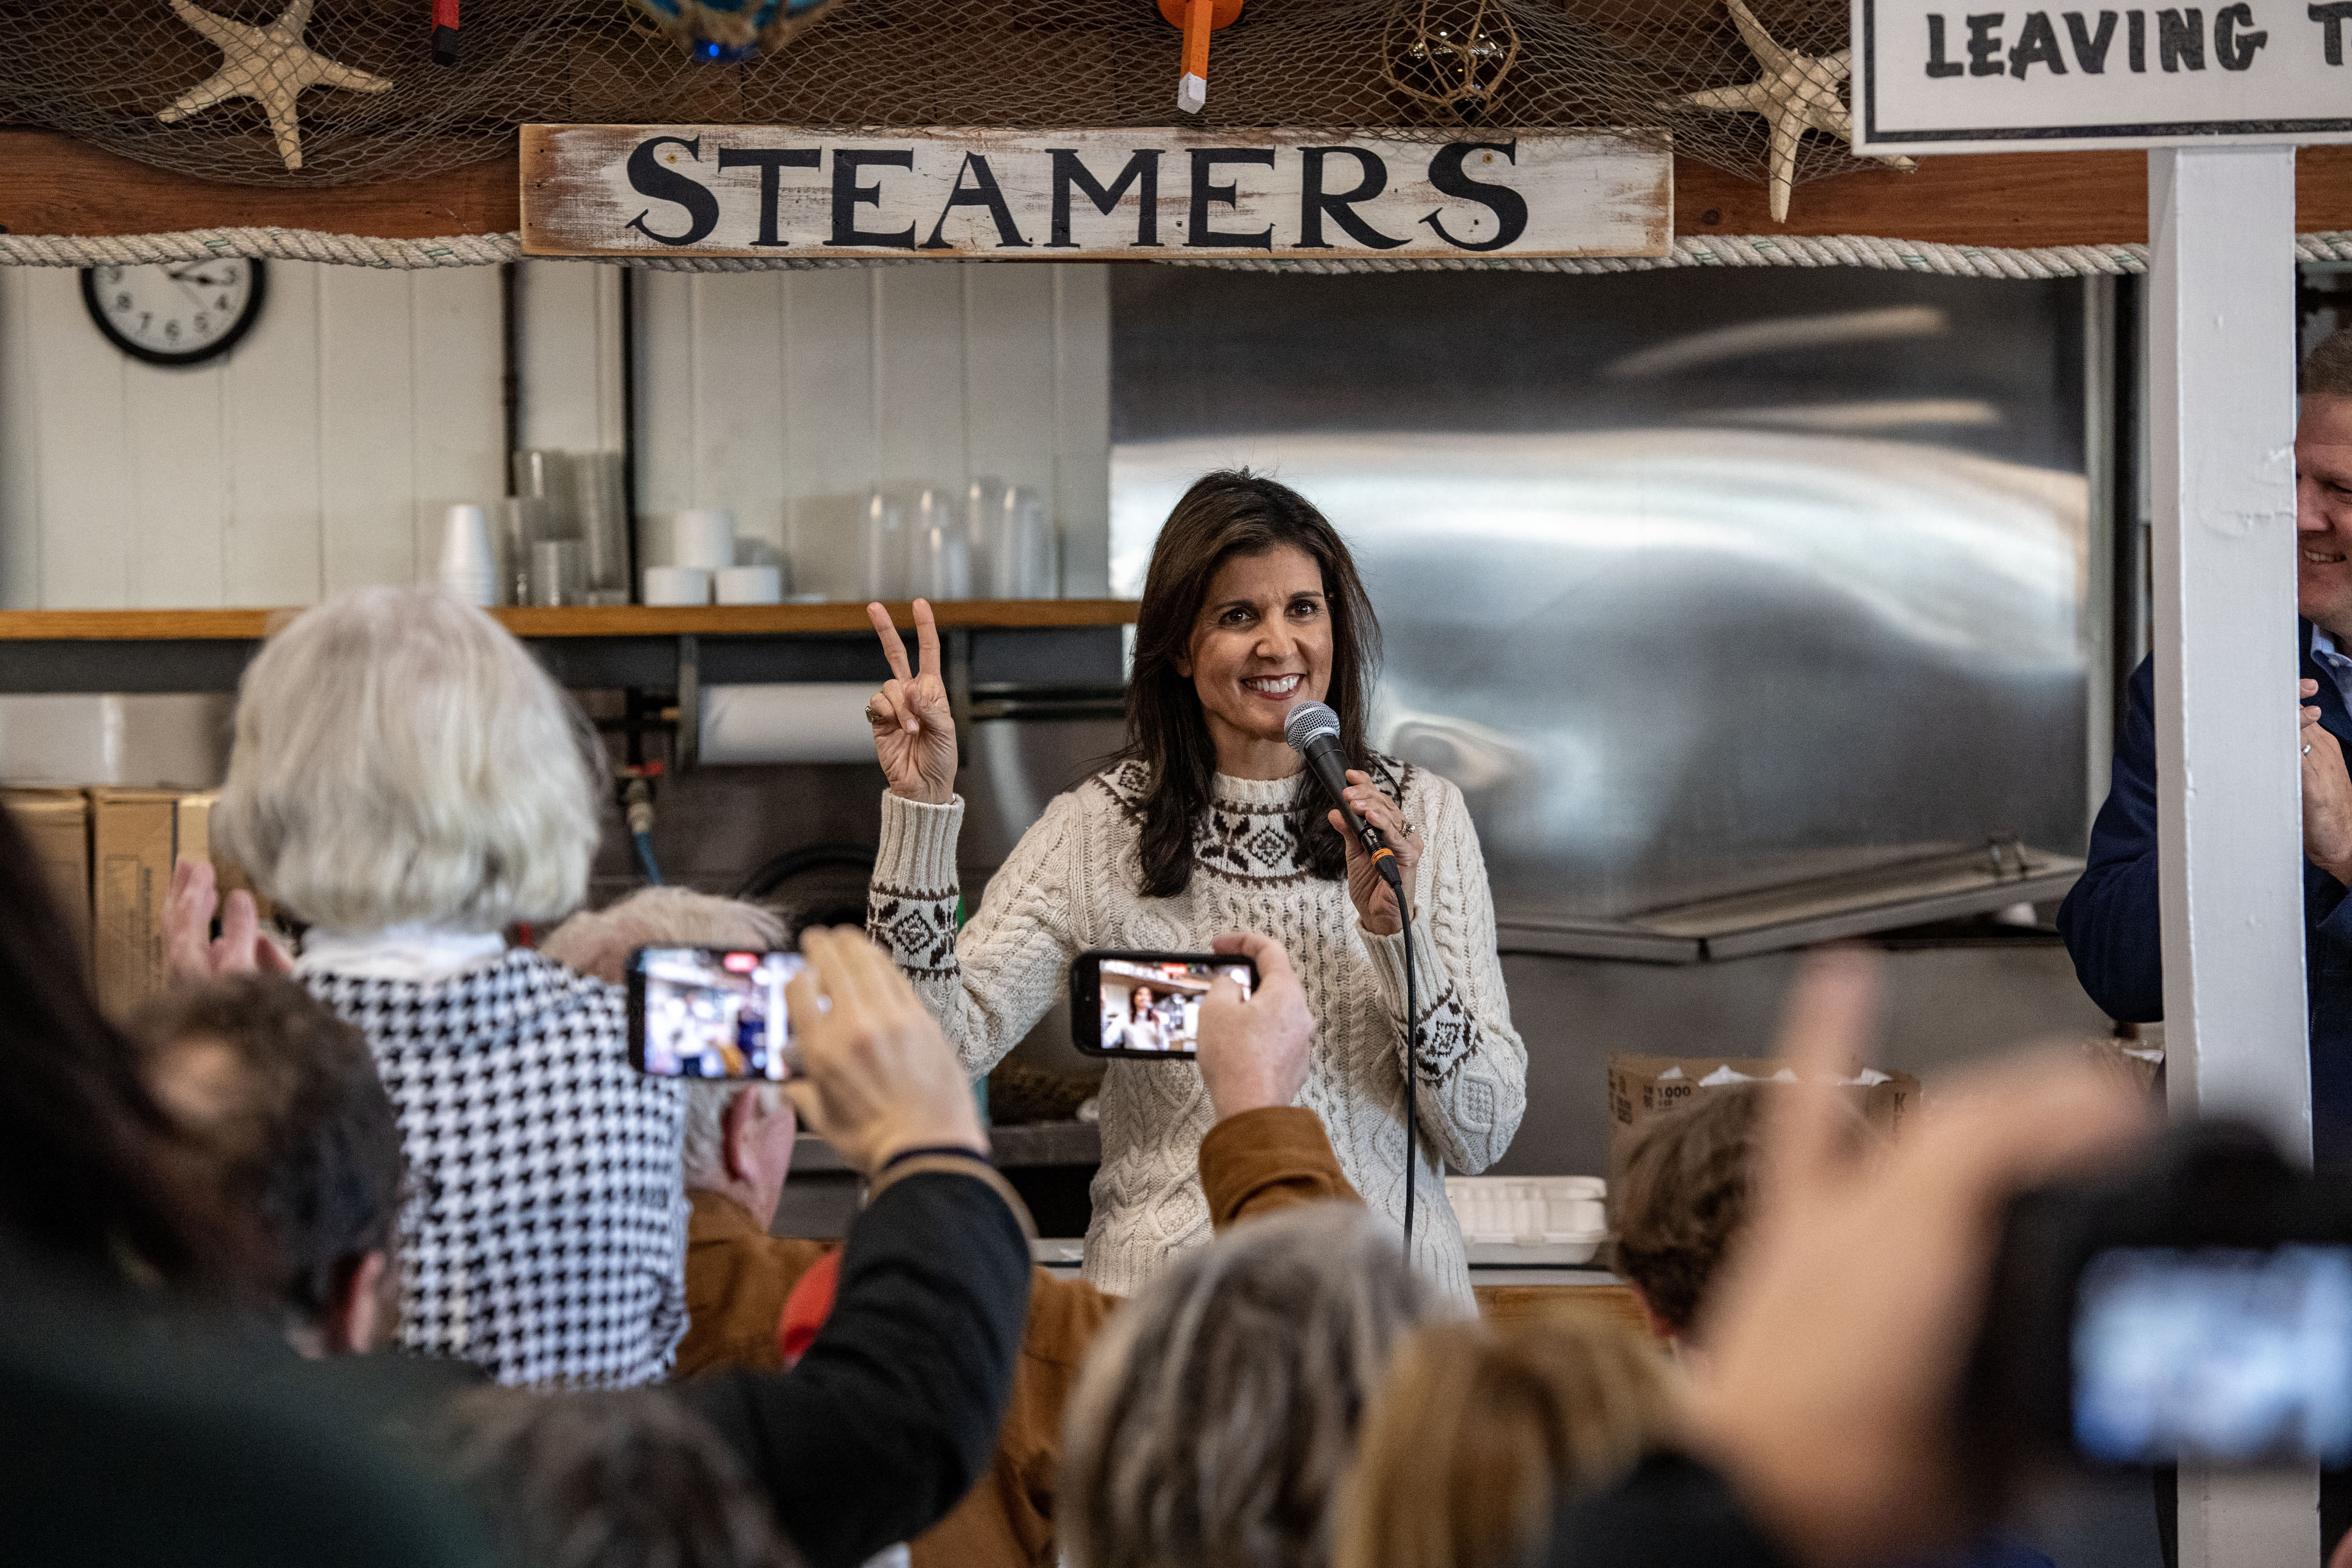 Republican presidential candidate Nikki Haley holds up two fingers as she speaks in Seabrook, New Hampshire, on January 21. Haley addressed the news of Florida Gov. Ron DeSantis dropping out of the presidential race, gesturing to indicate that it is now a two-person race.